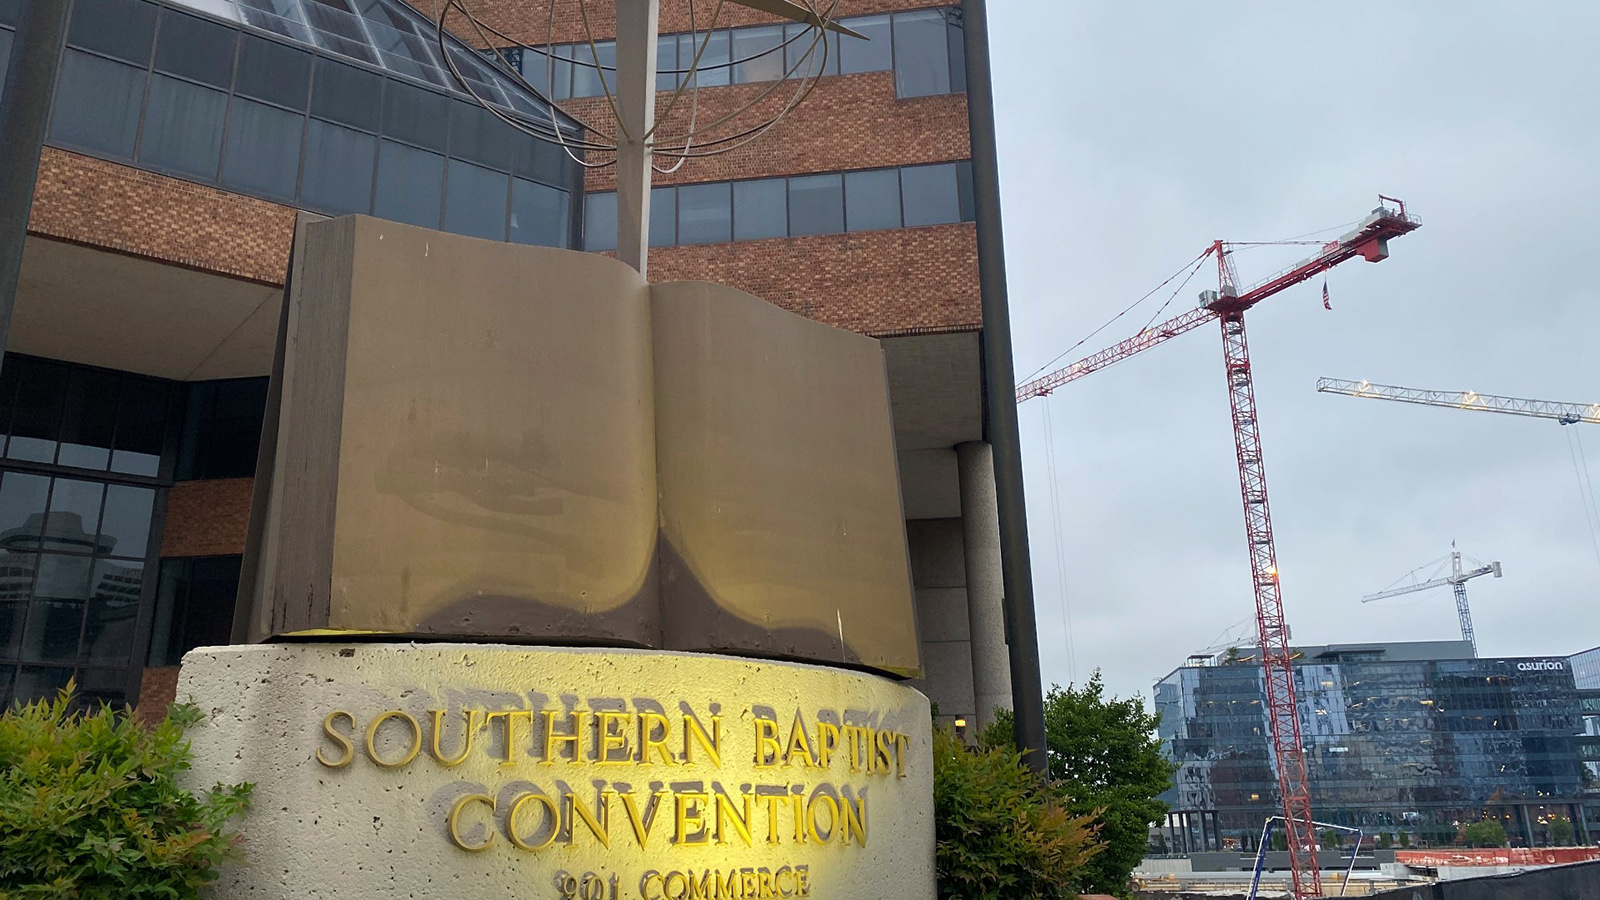 A cross and Bible sculpture stand outside the Southern Baptist Convention headquarters in Nashville, Tennessee.